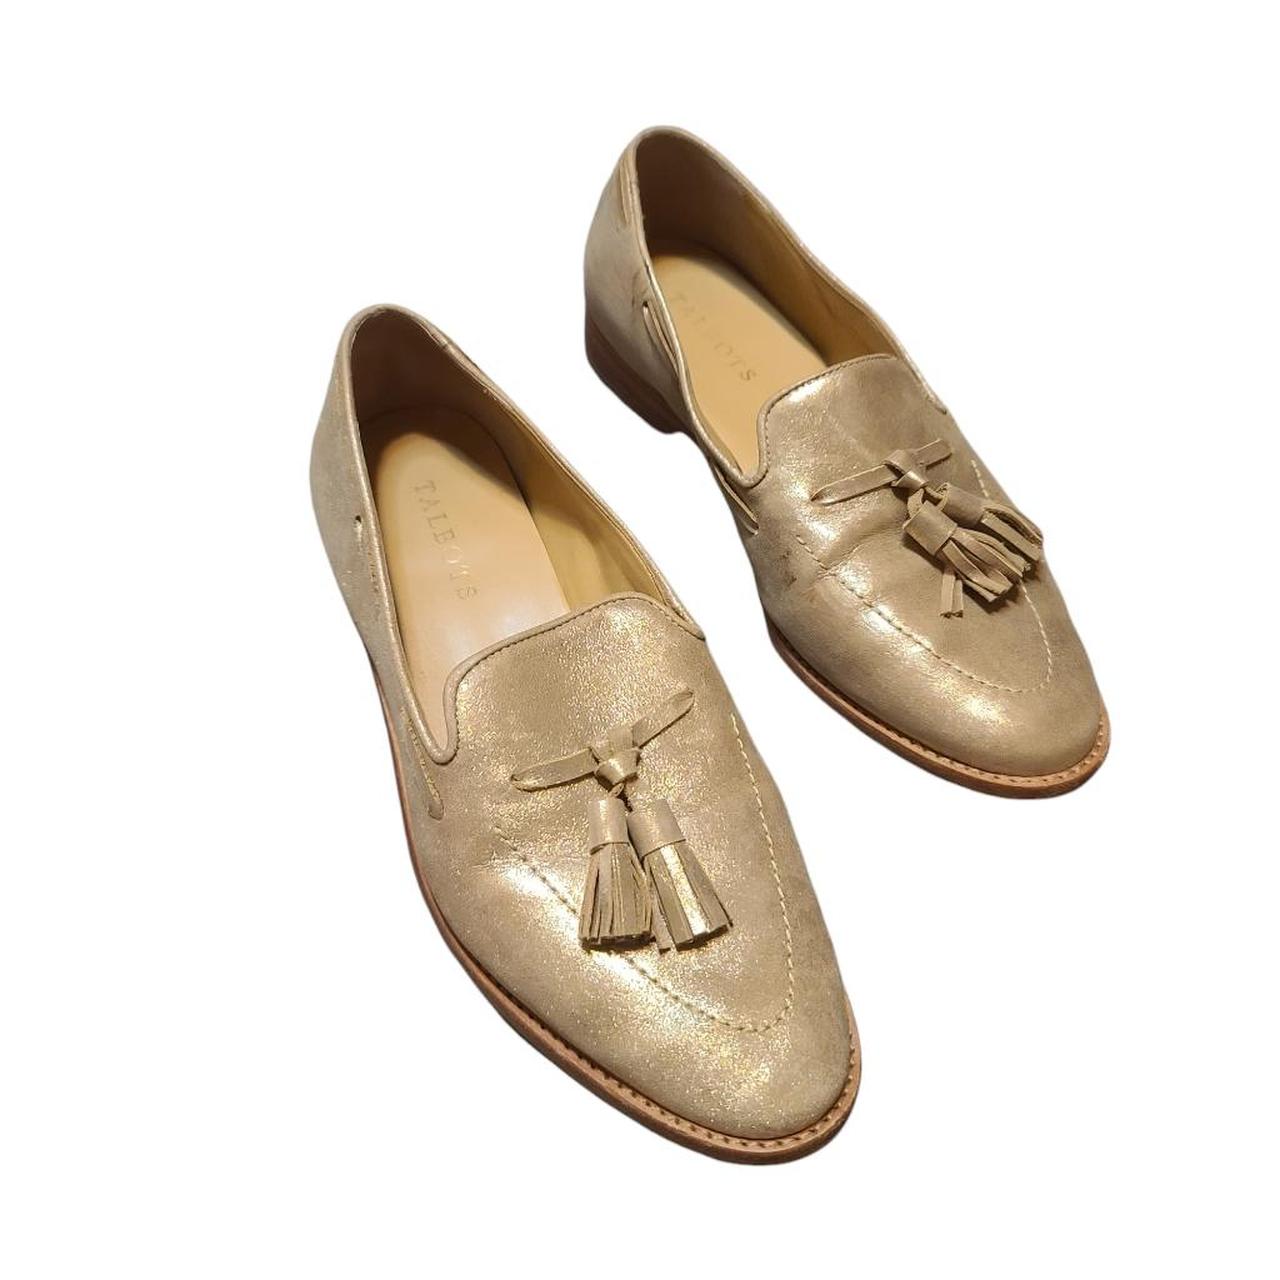 Talbots Women's Gold and Tan Loafers | Depop